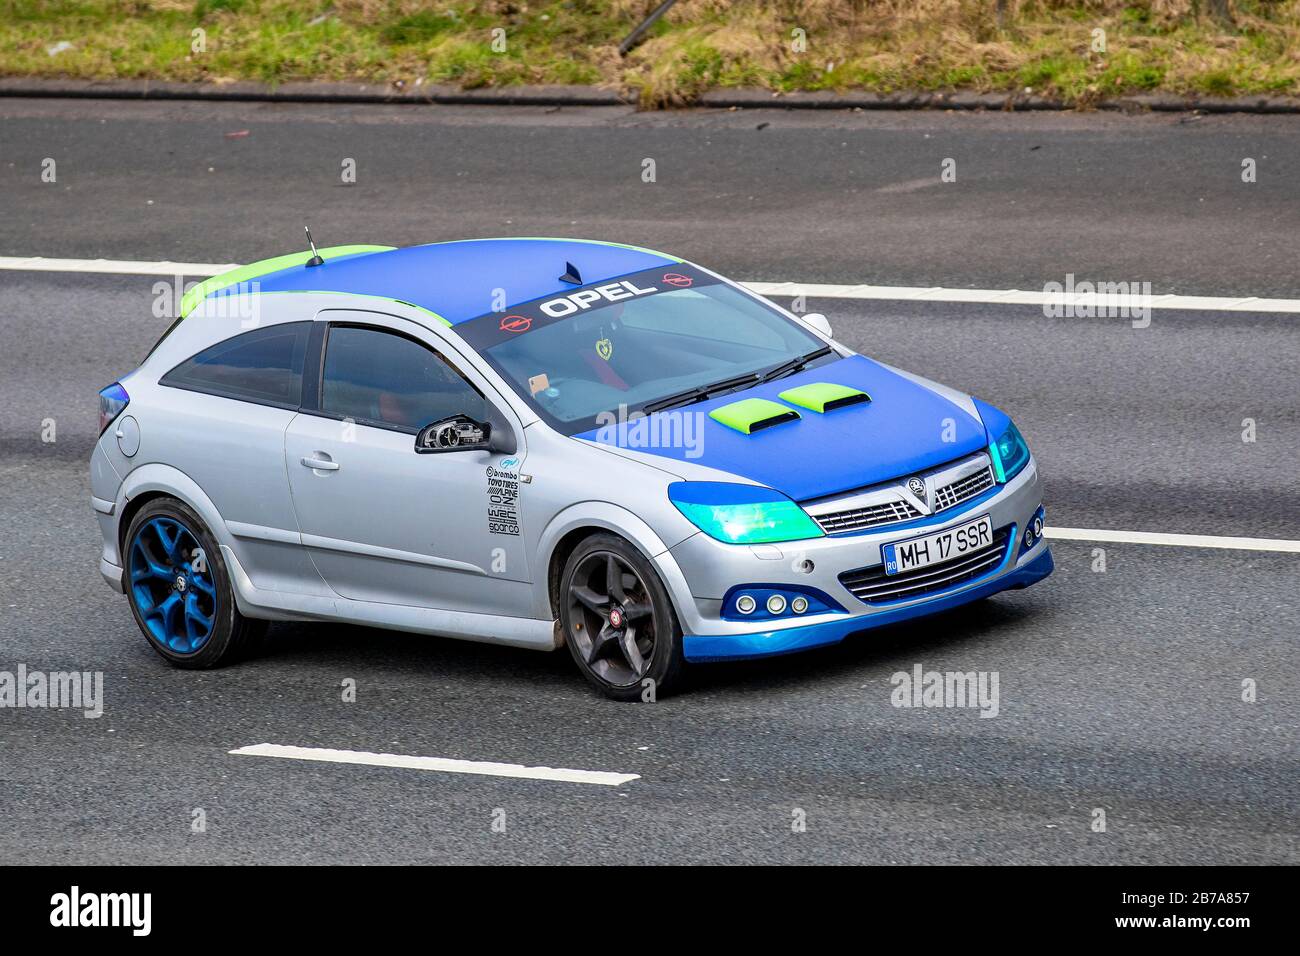 2013 Modified Blue grey Opel Astra OPC hatchback racing 2dr car; Vehicular traffic, transport, custommized modern vehicles, saloon family cars, vehicle on UK roads, motors, motoring on the M6 motorway Stock Photo